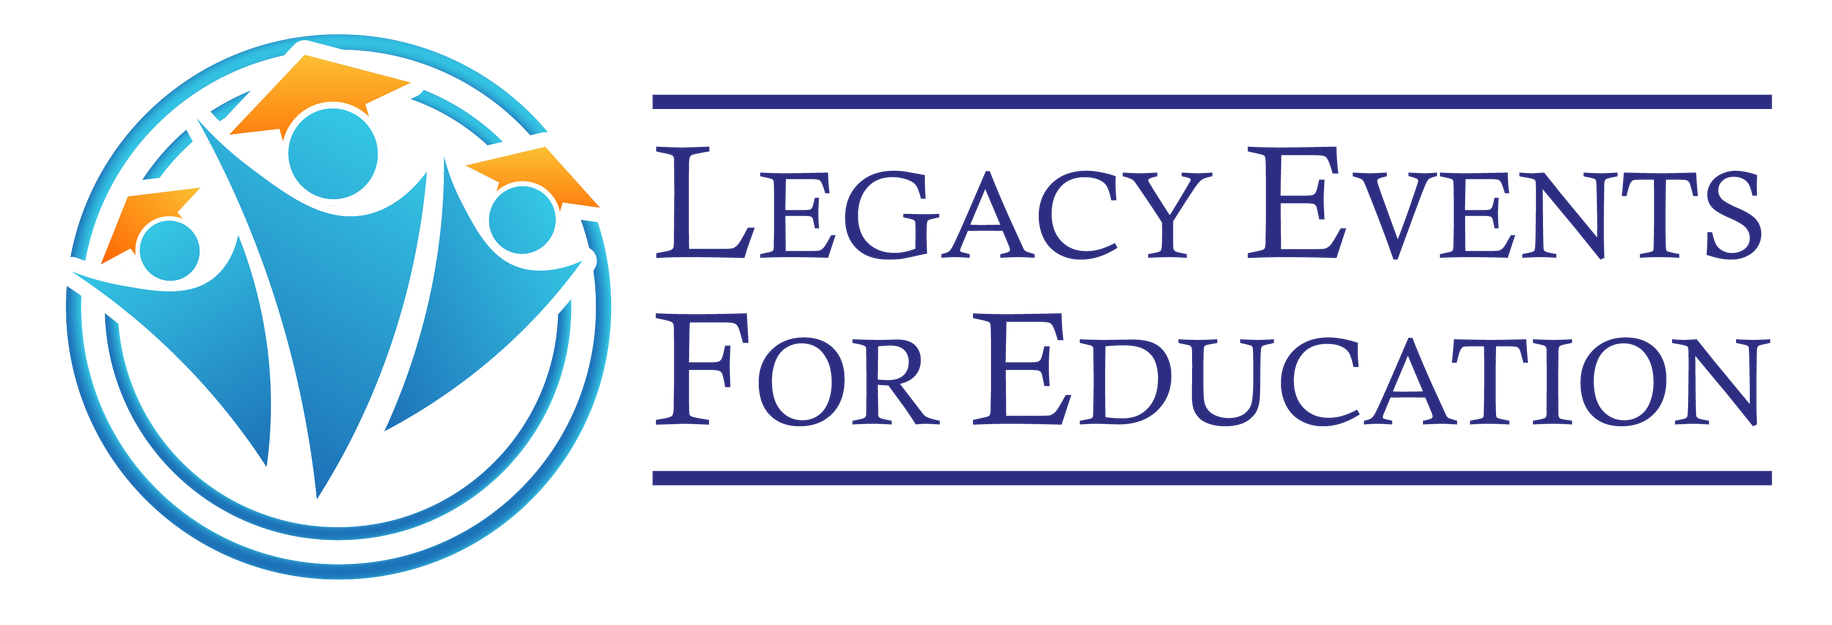 Legacy Events For Education